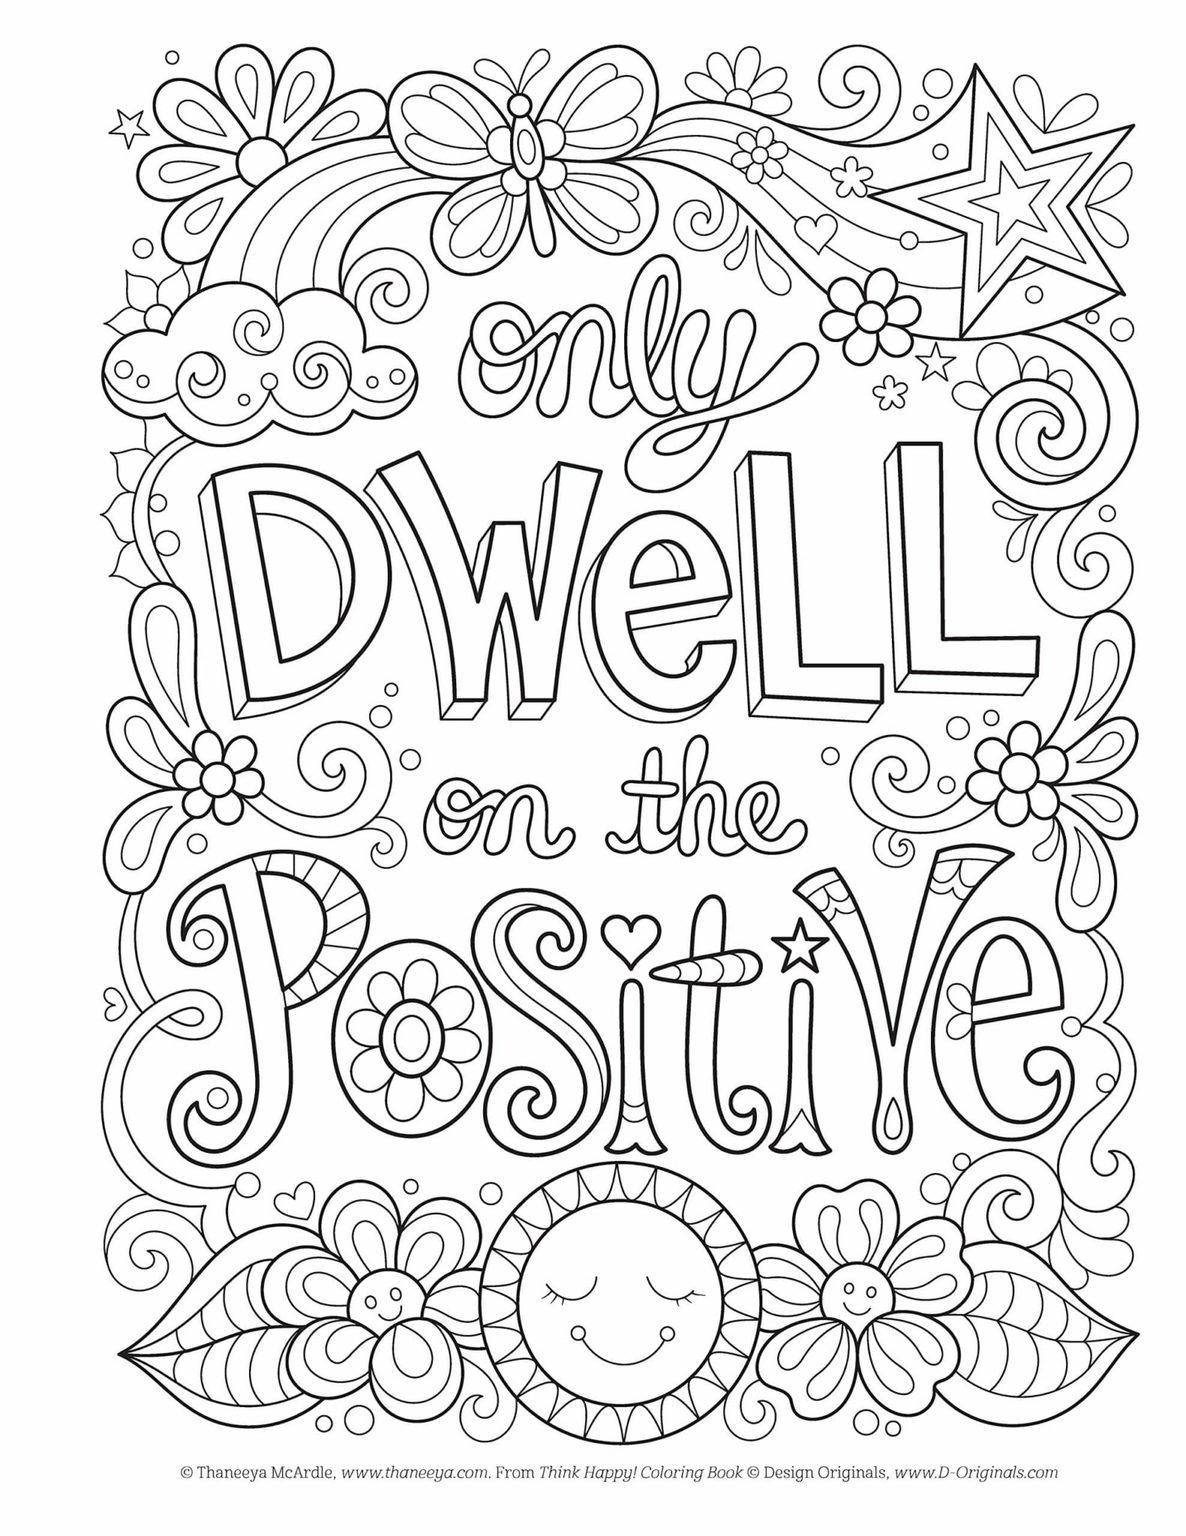 35 Adult Coloring Pages That Are Printable And Fun - Happier Human